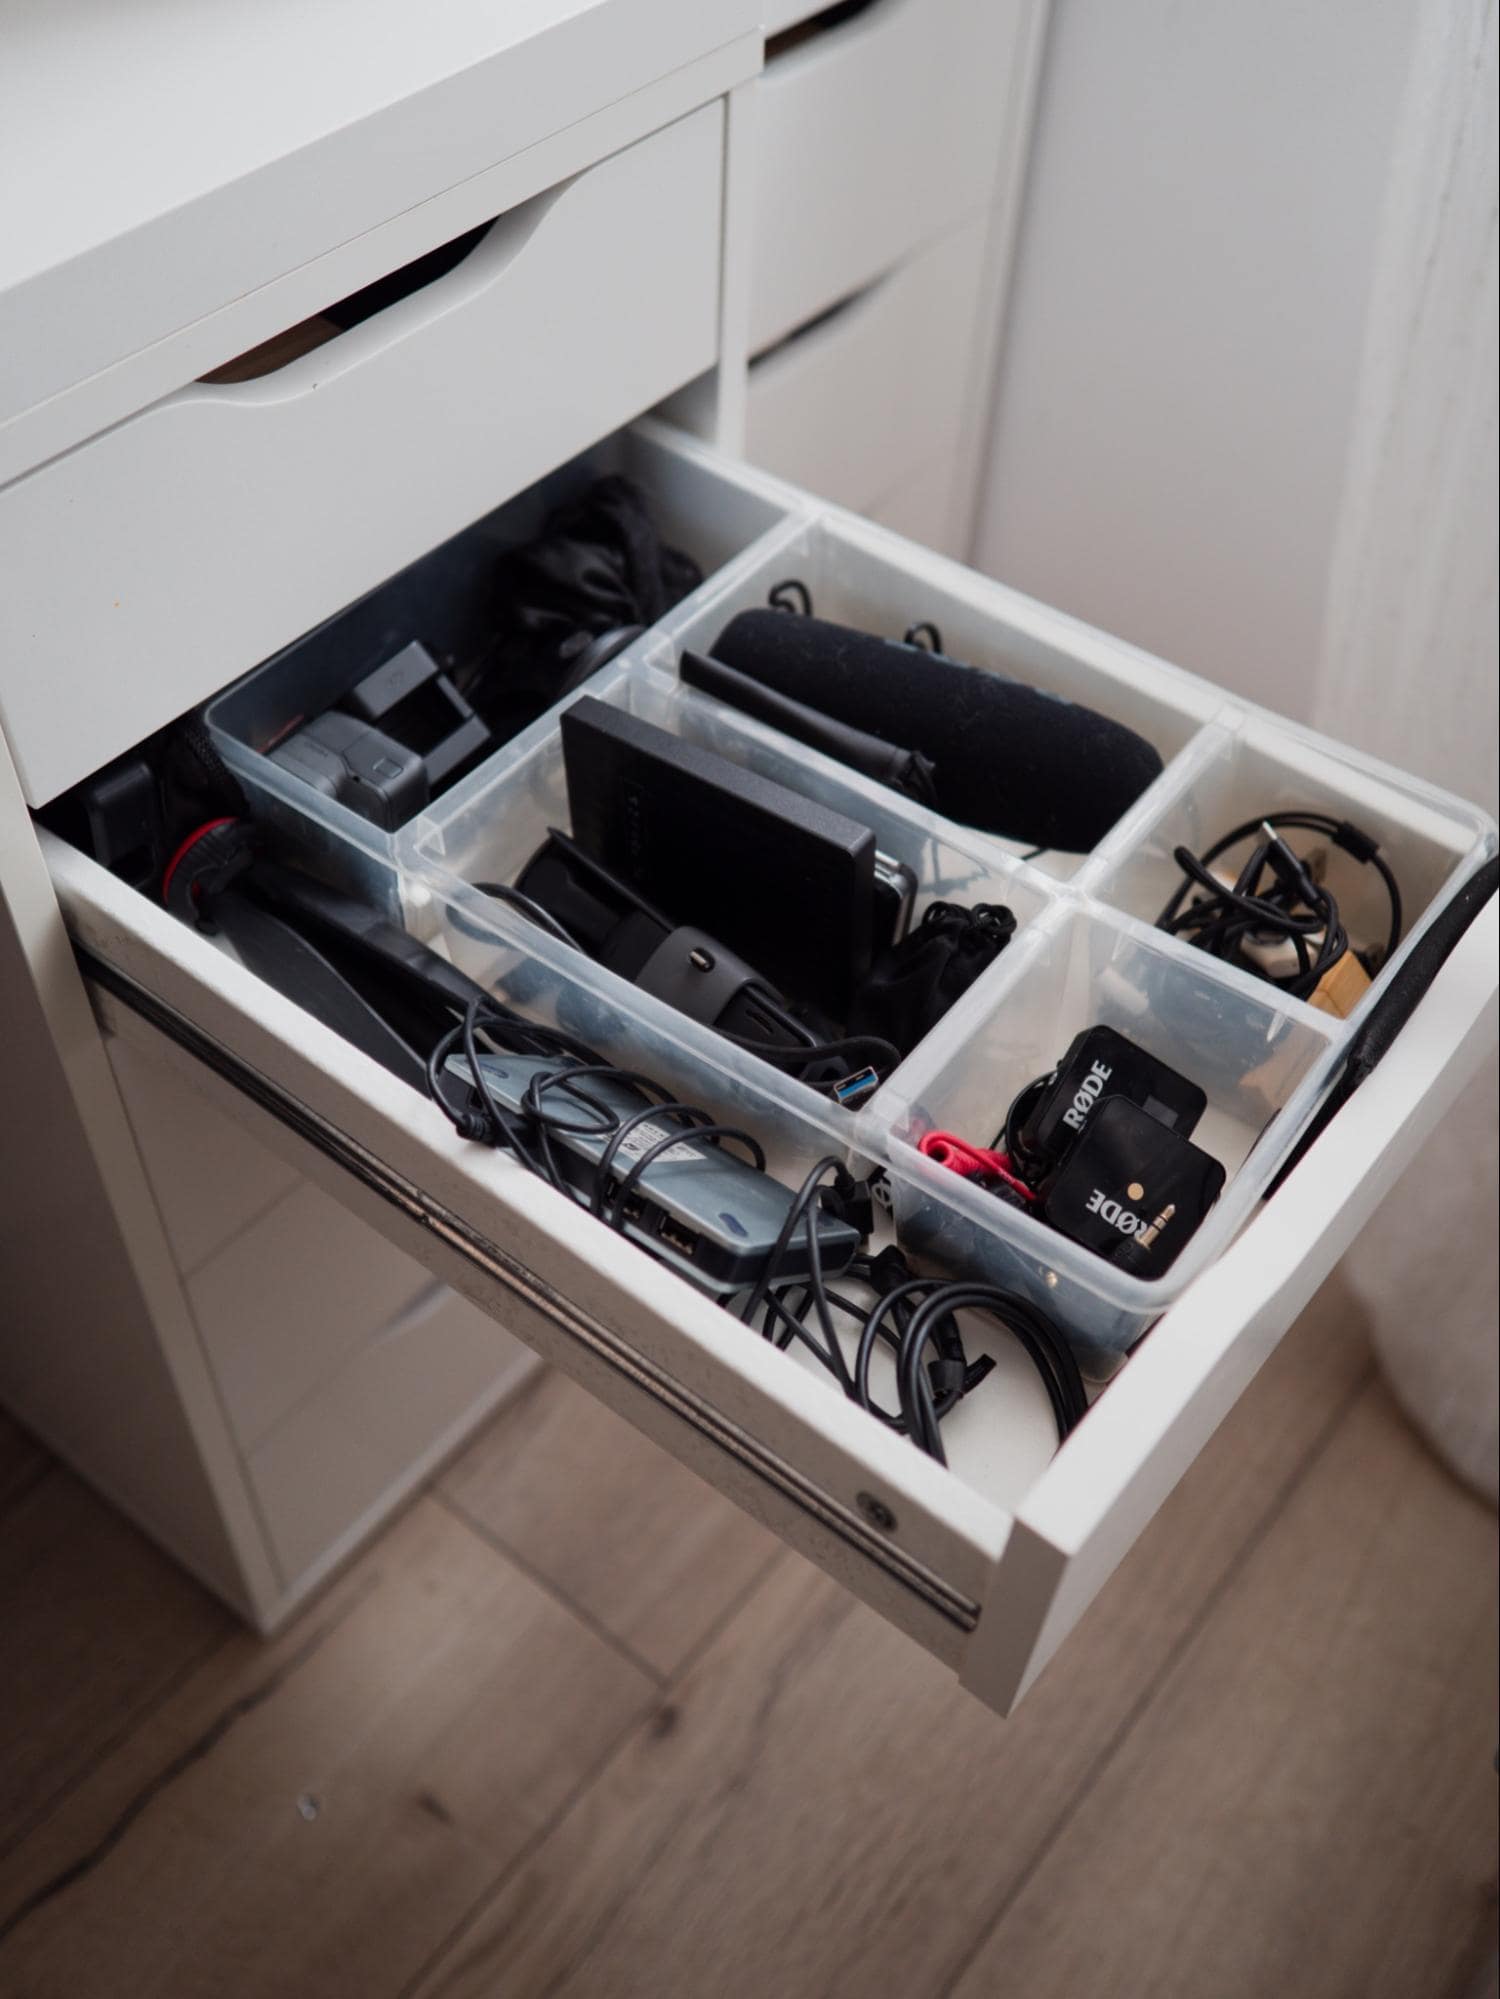 A storage system for photo and video accessories inside the IKEA ALEX drawers